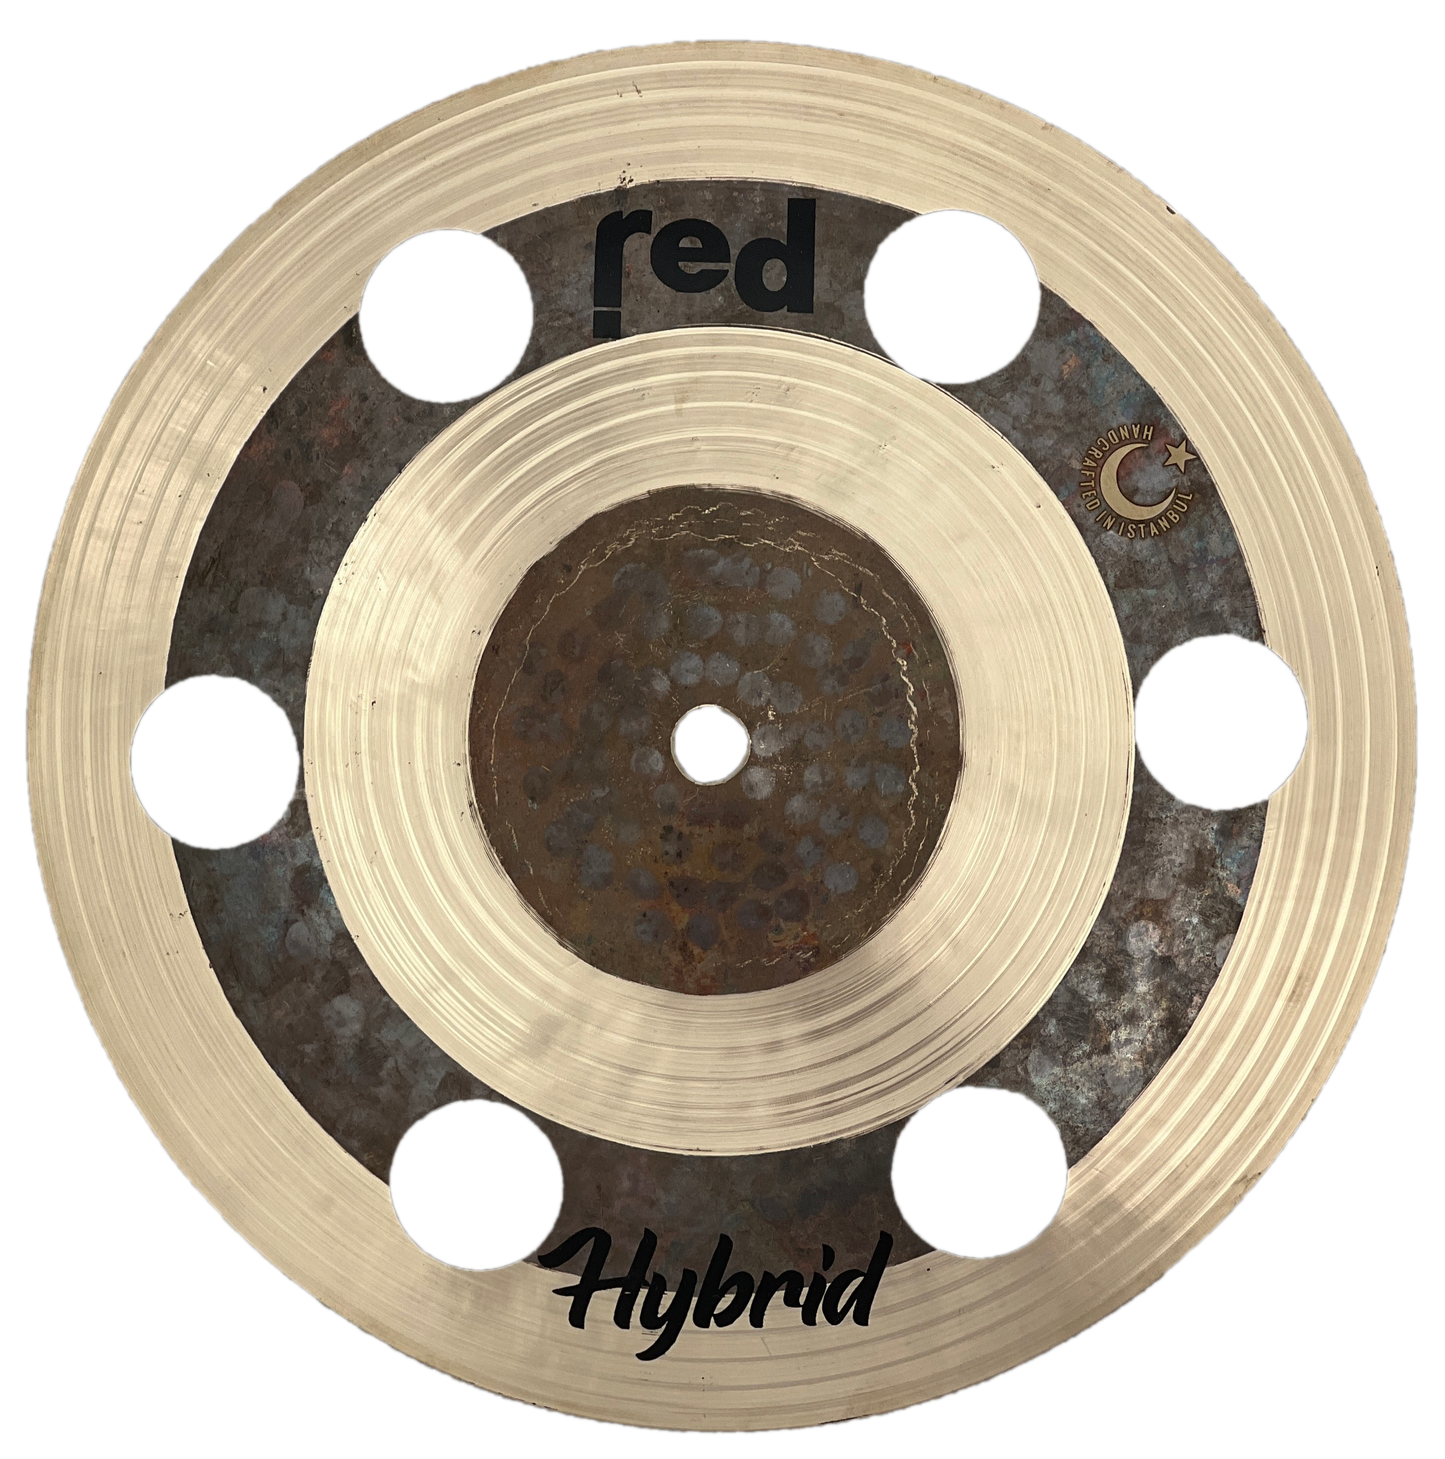 Red Cymbals Hybrid Series fx Splash cymbal - 'made to order'